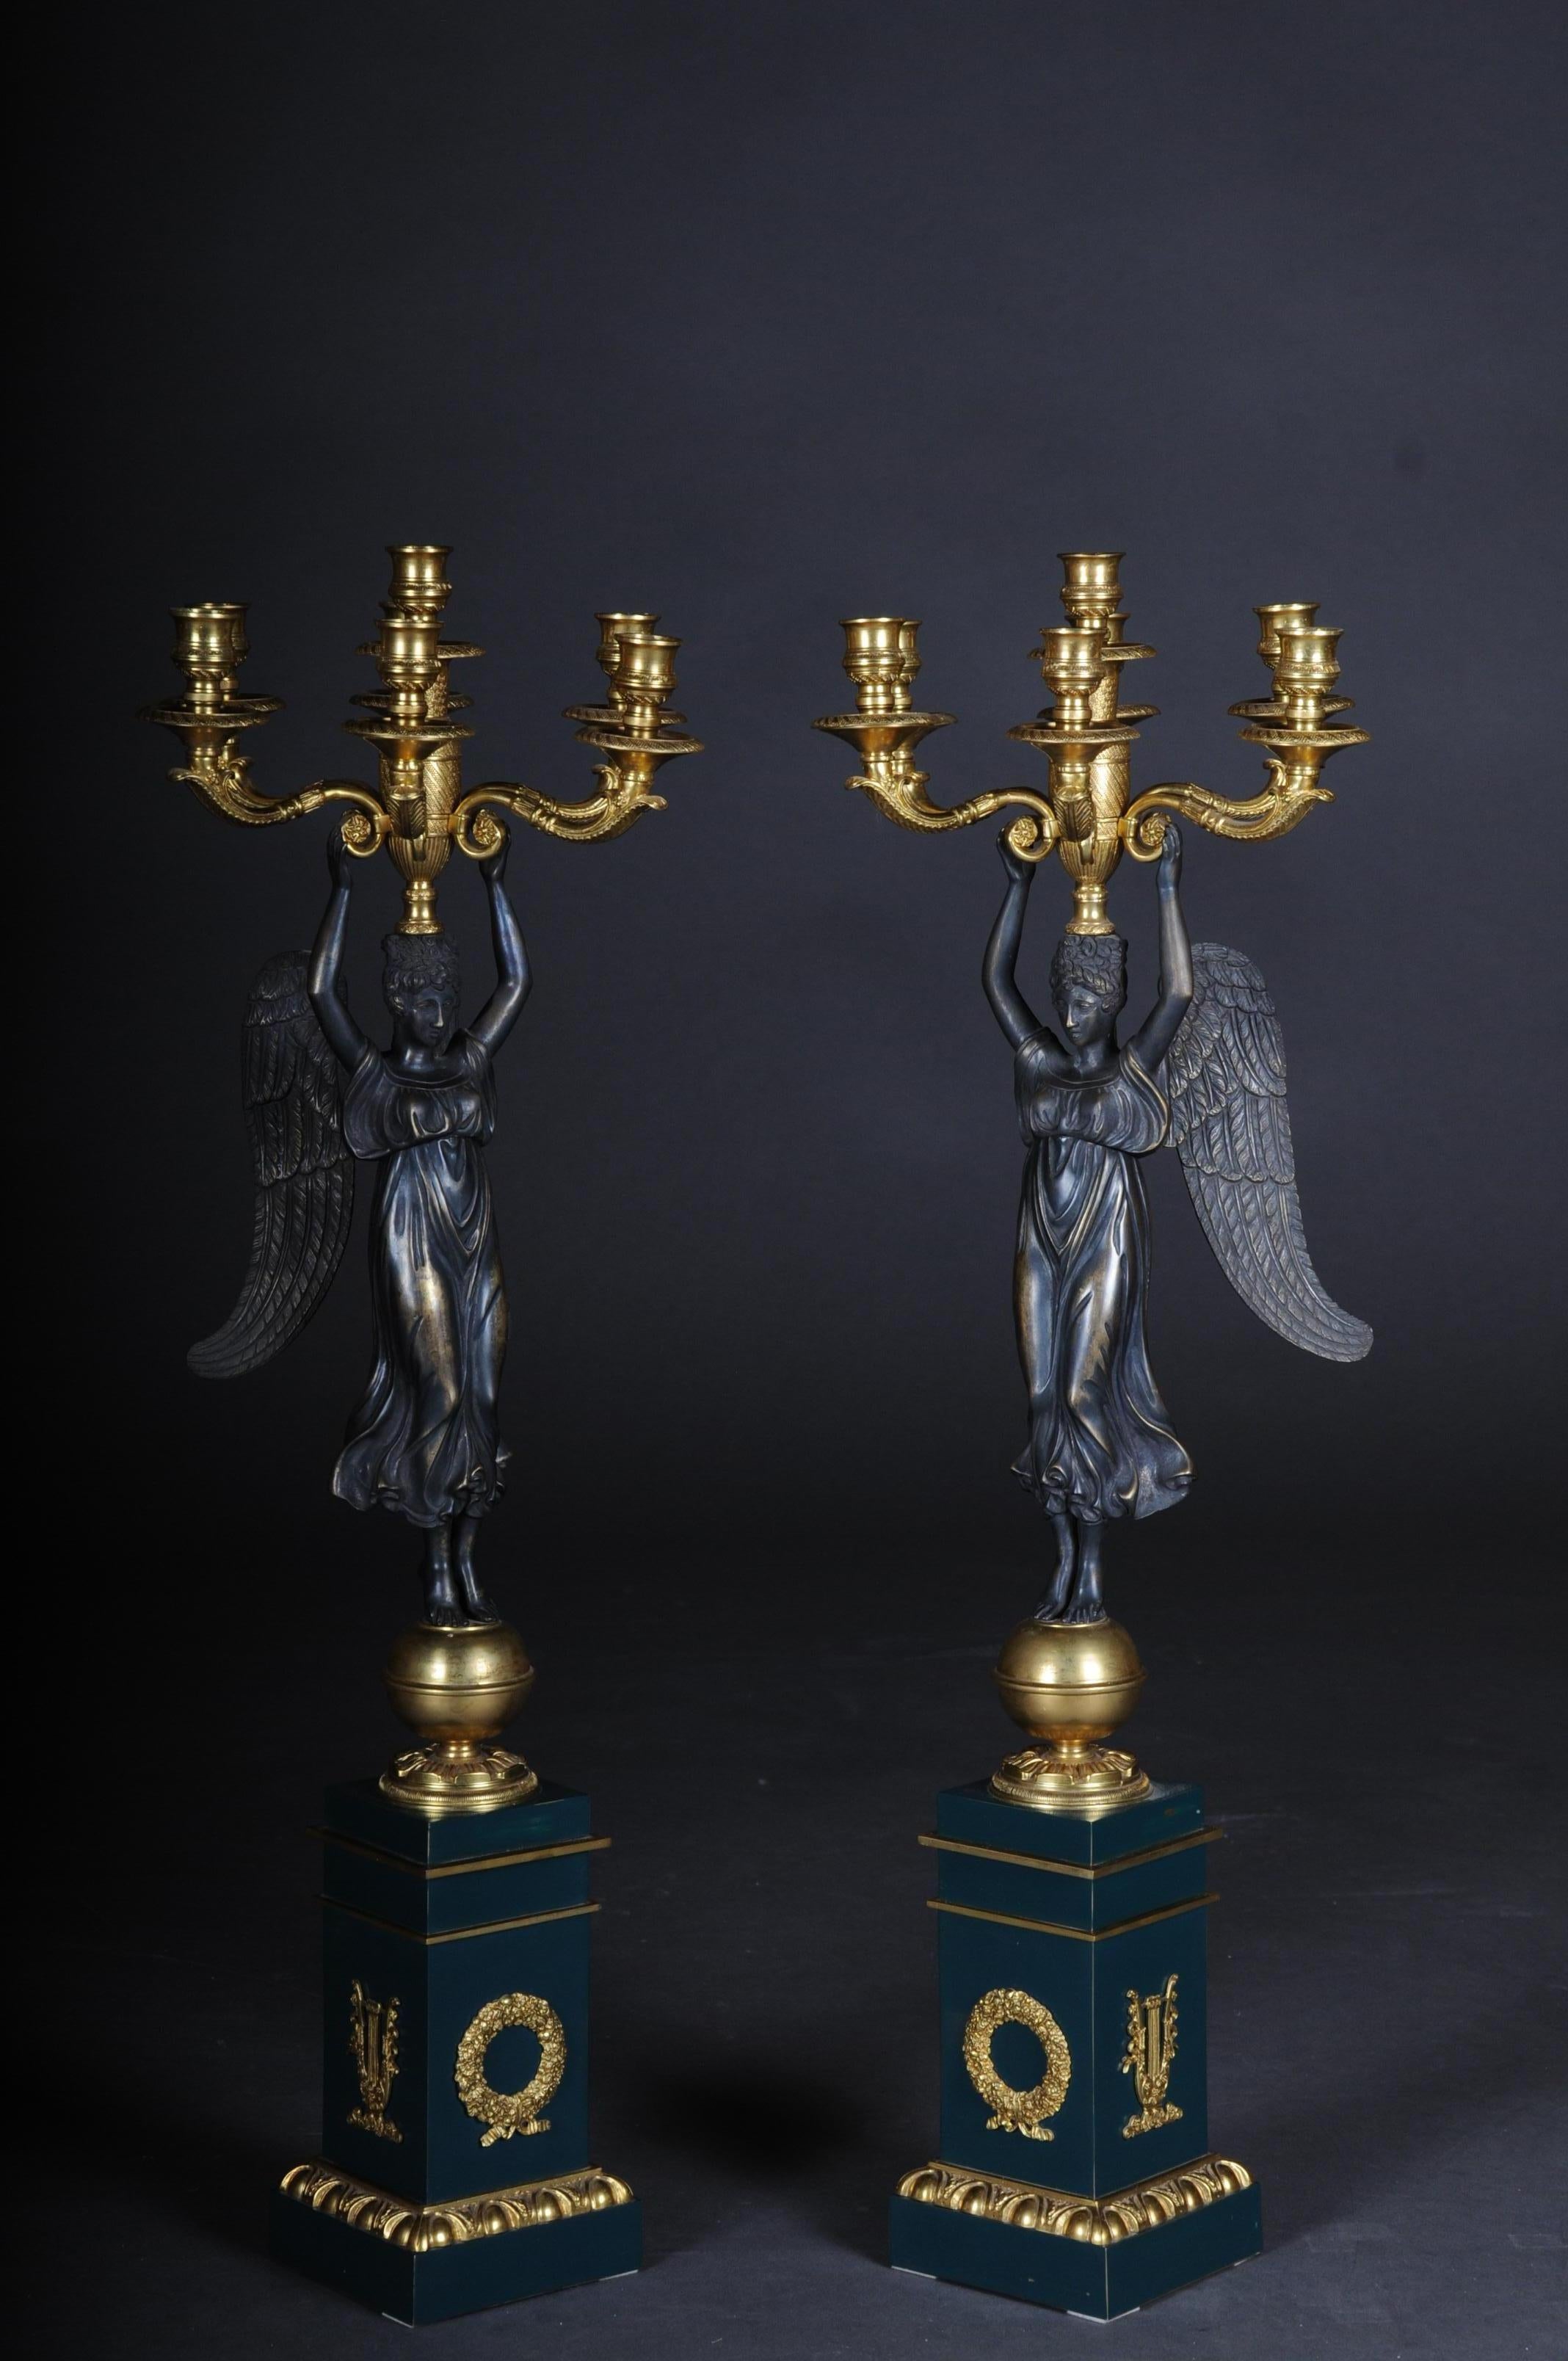 A pair of Empire ceremonial candelabras / candlesticks after P. P. Thomire


Victoria standing on a gold ball in a long, pleated robe, carrying a vase with a central shaft and 7 curved light arms with round drip plates and cylindrical spouts, on